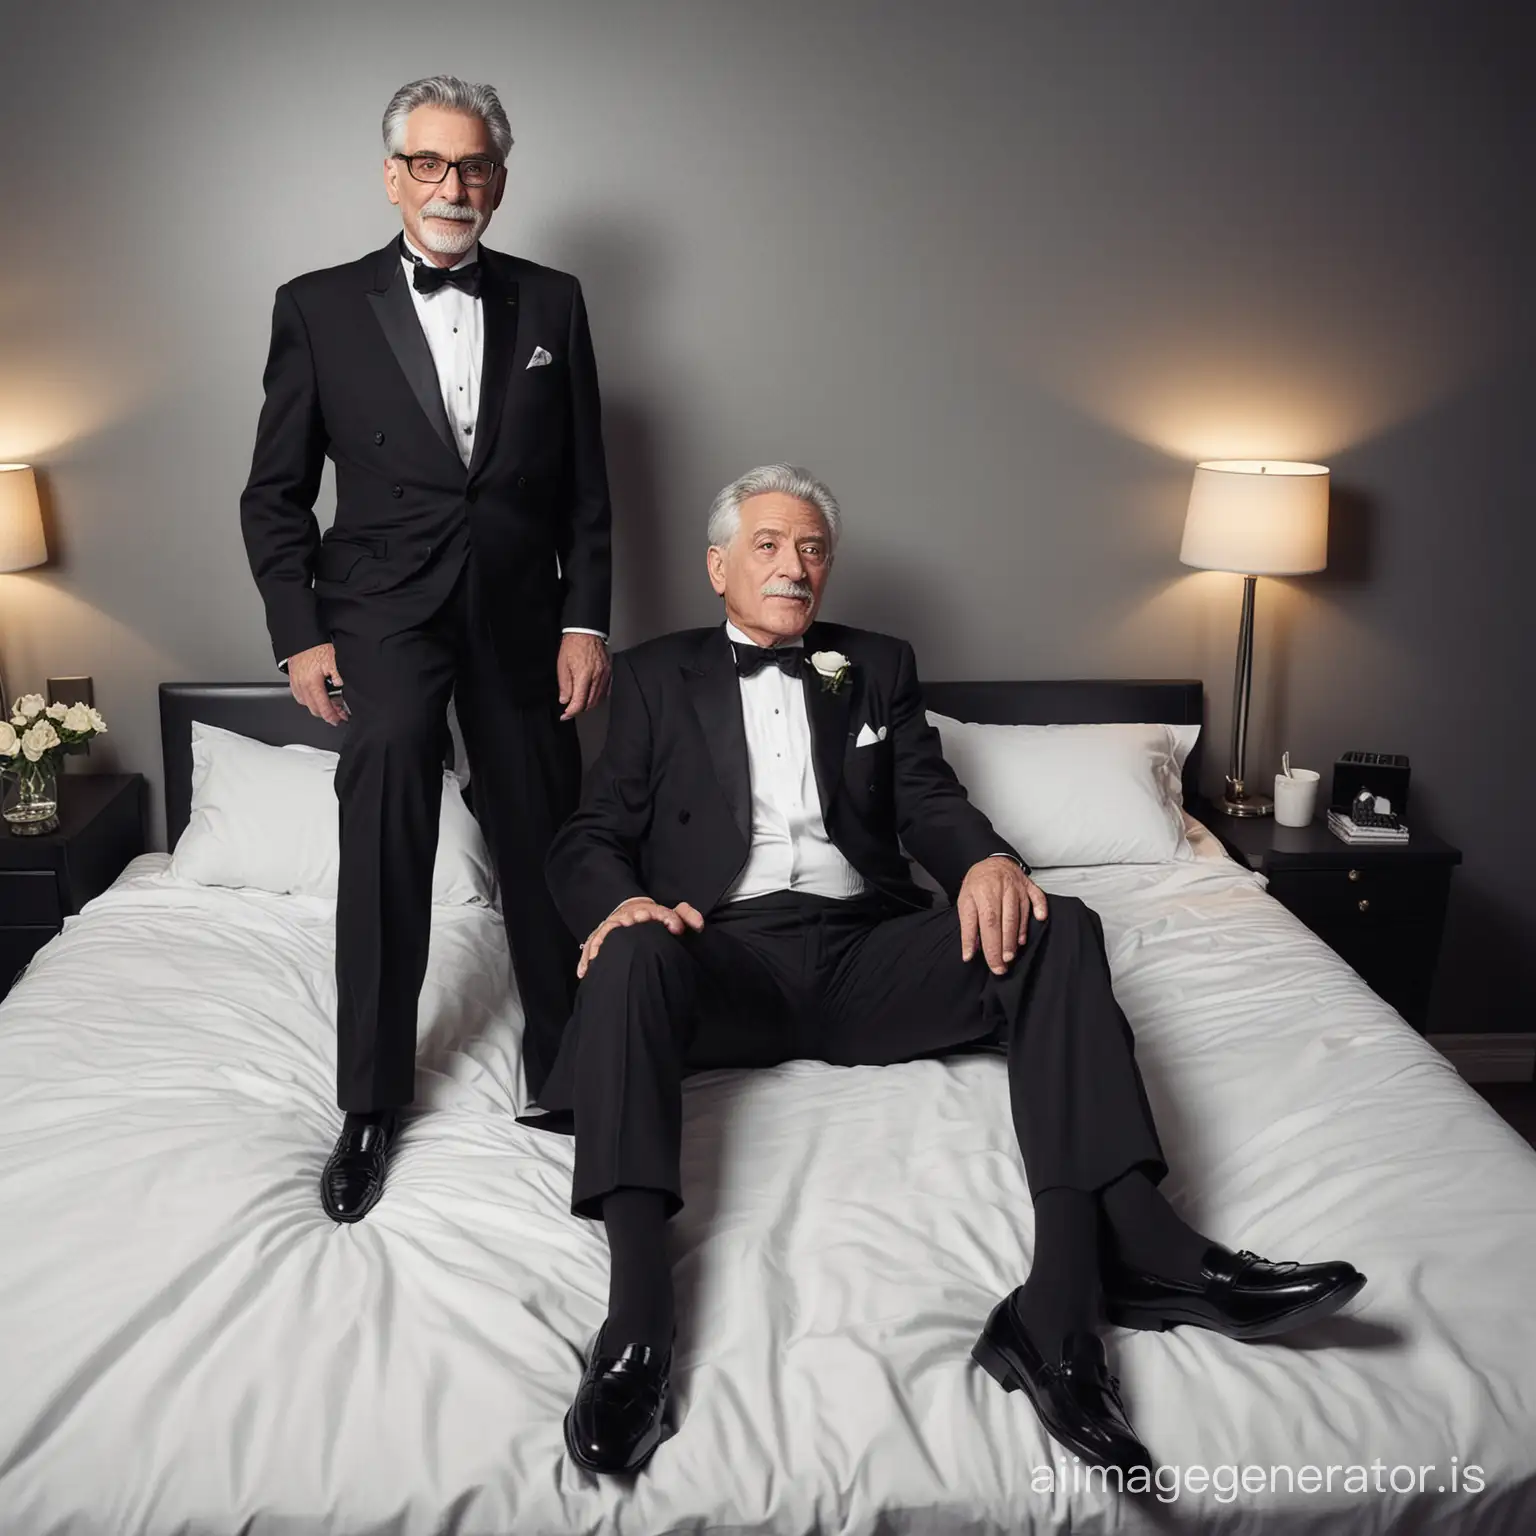 Two men, both 80 years old gentlemen, shot height, both wearing tuxedo, black loafers, grey hair,  embarrassing face, laying on the bed, full body shot, full body shot, office background, dramatic lighting